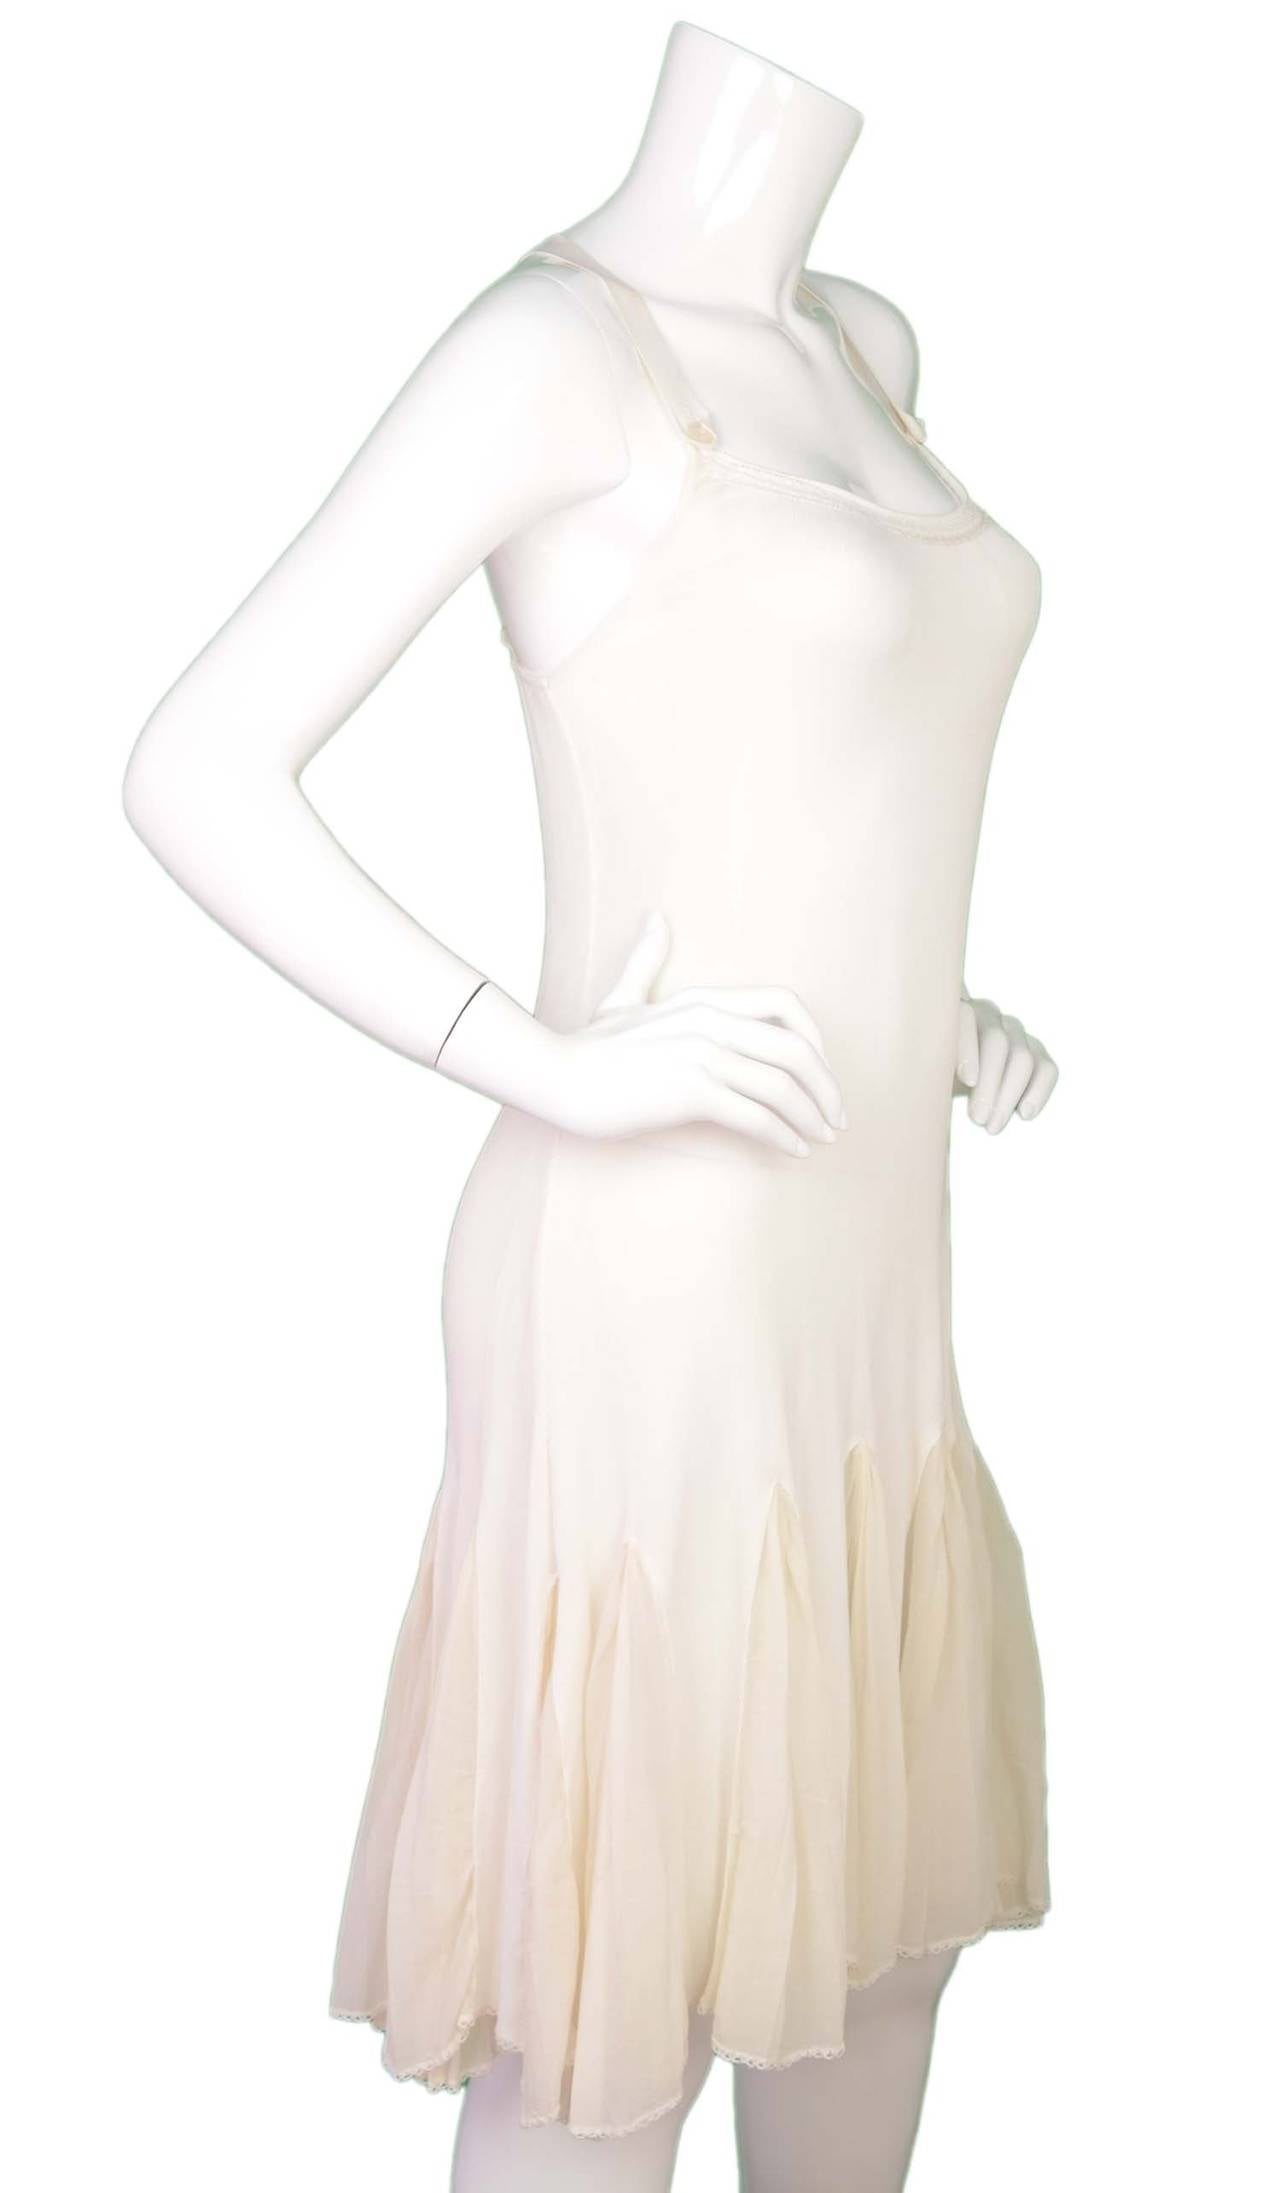 Chanel Ivory Godet Criss-Cross Dress
Features button front shoulder straps
Made in: France
Year of Production: 2004
Color: Ivory
Composition: 100% rayon
Lining: Ivory, 70% silk, 30% polyester
Closure/opening: Pull on
Exterior Pockets: